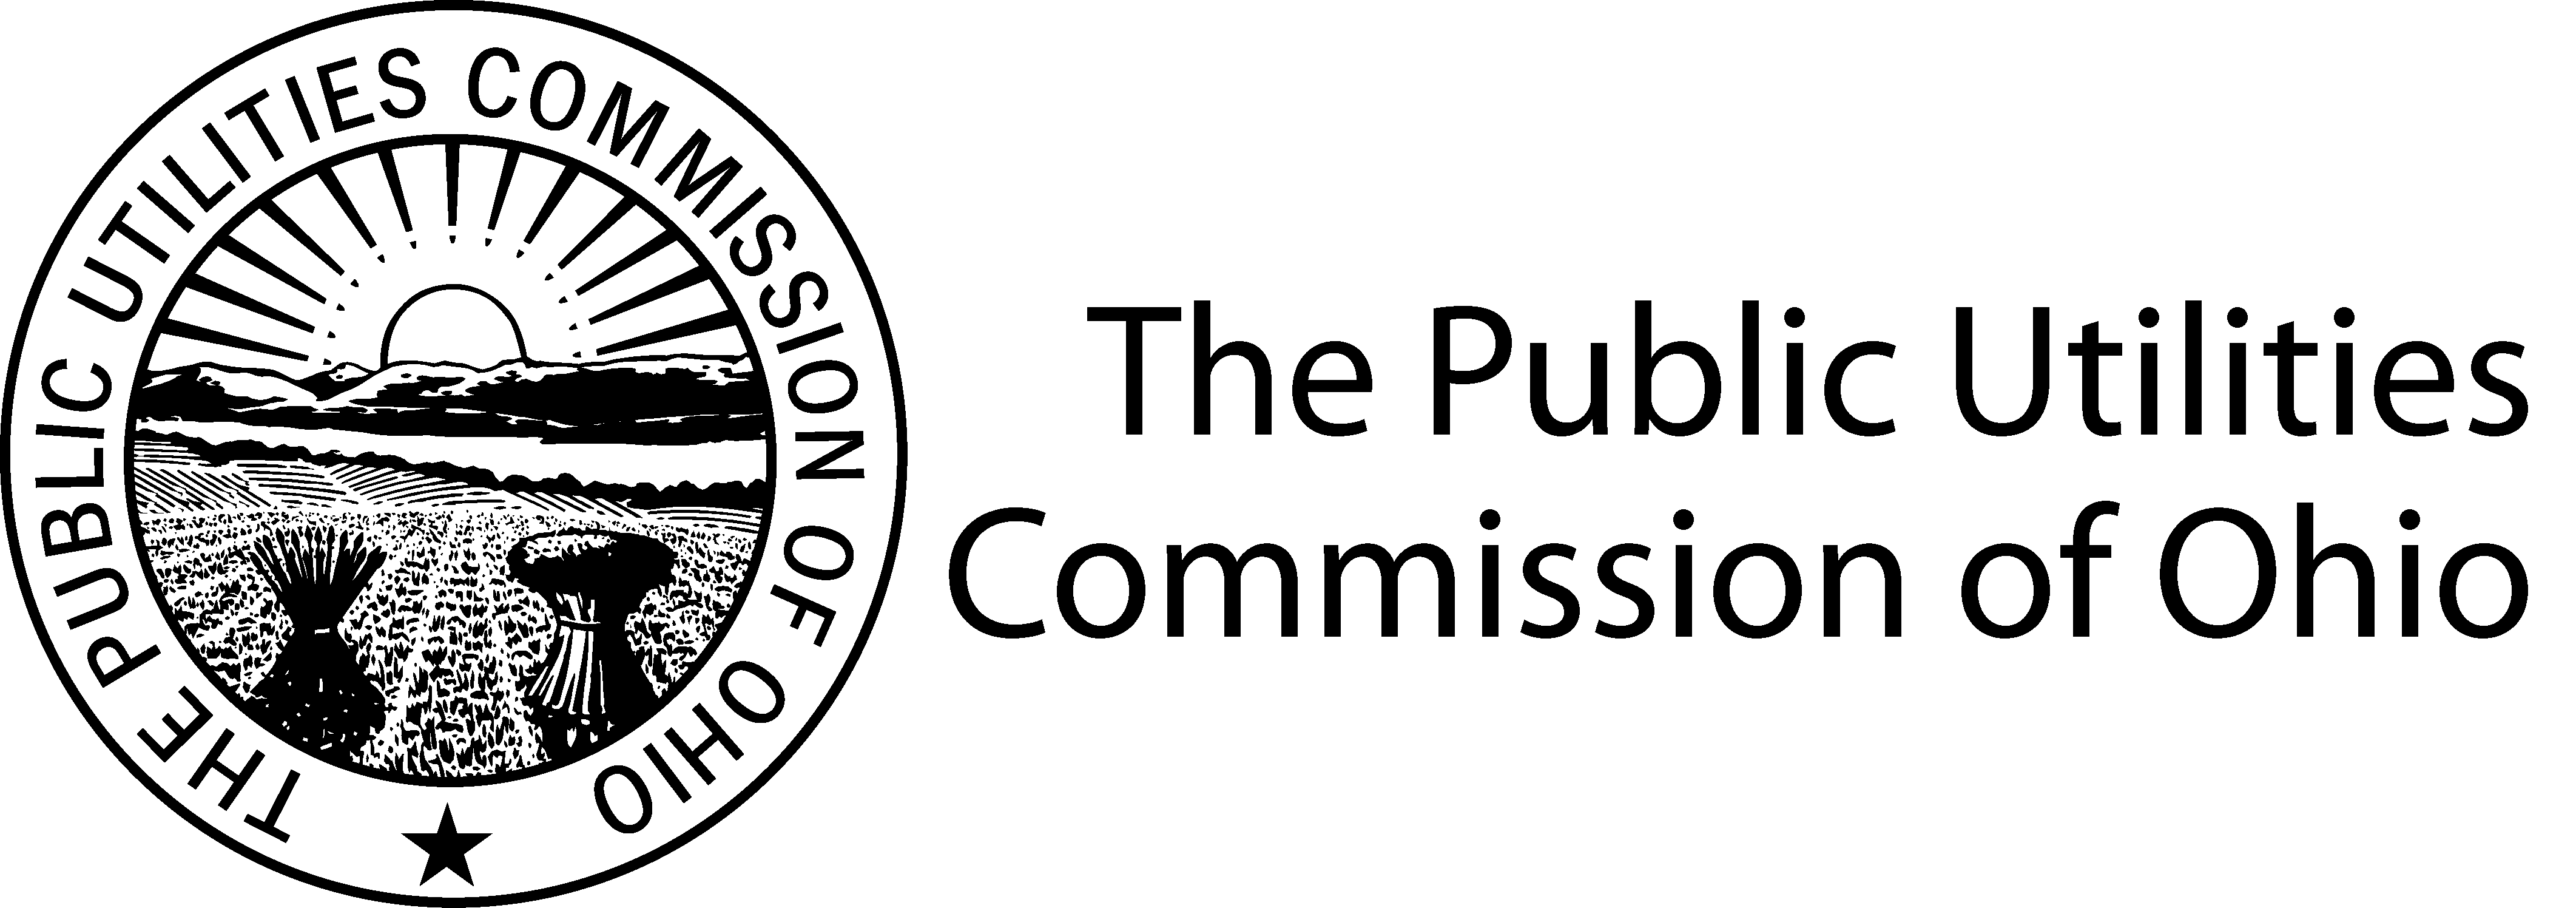 PUBLIC UTILITIES COMMISSION OF OHIO SERVICE MONITORING AND ENFORCEMENT